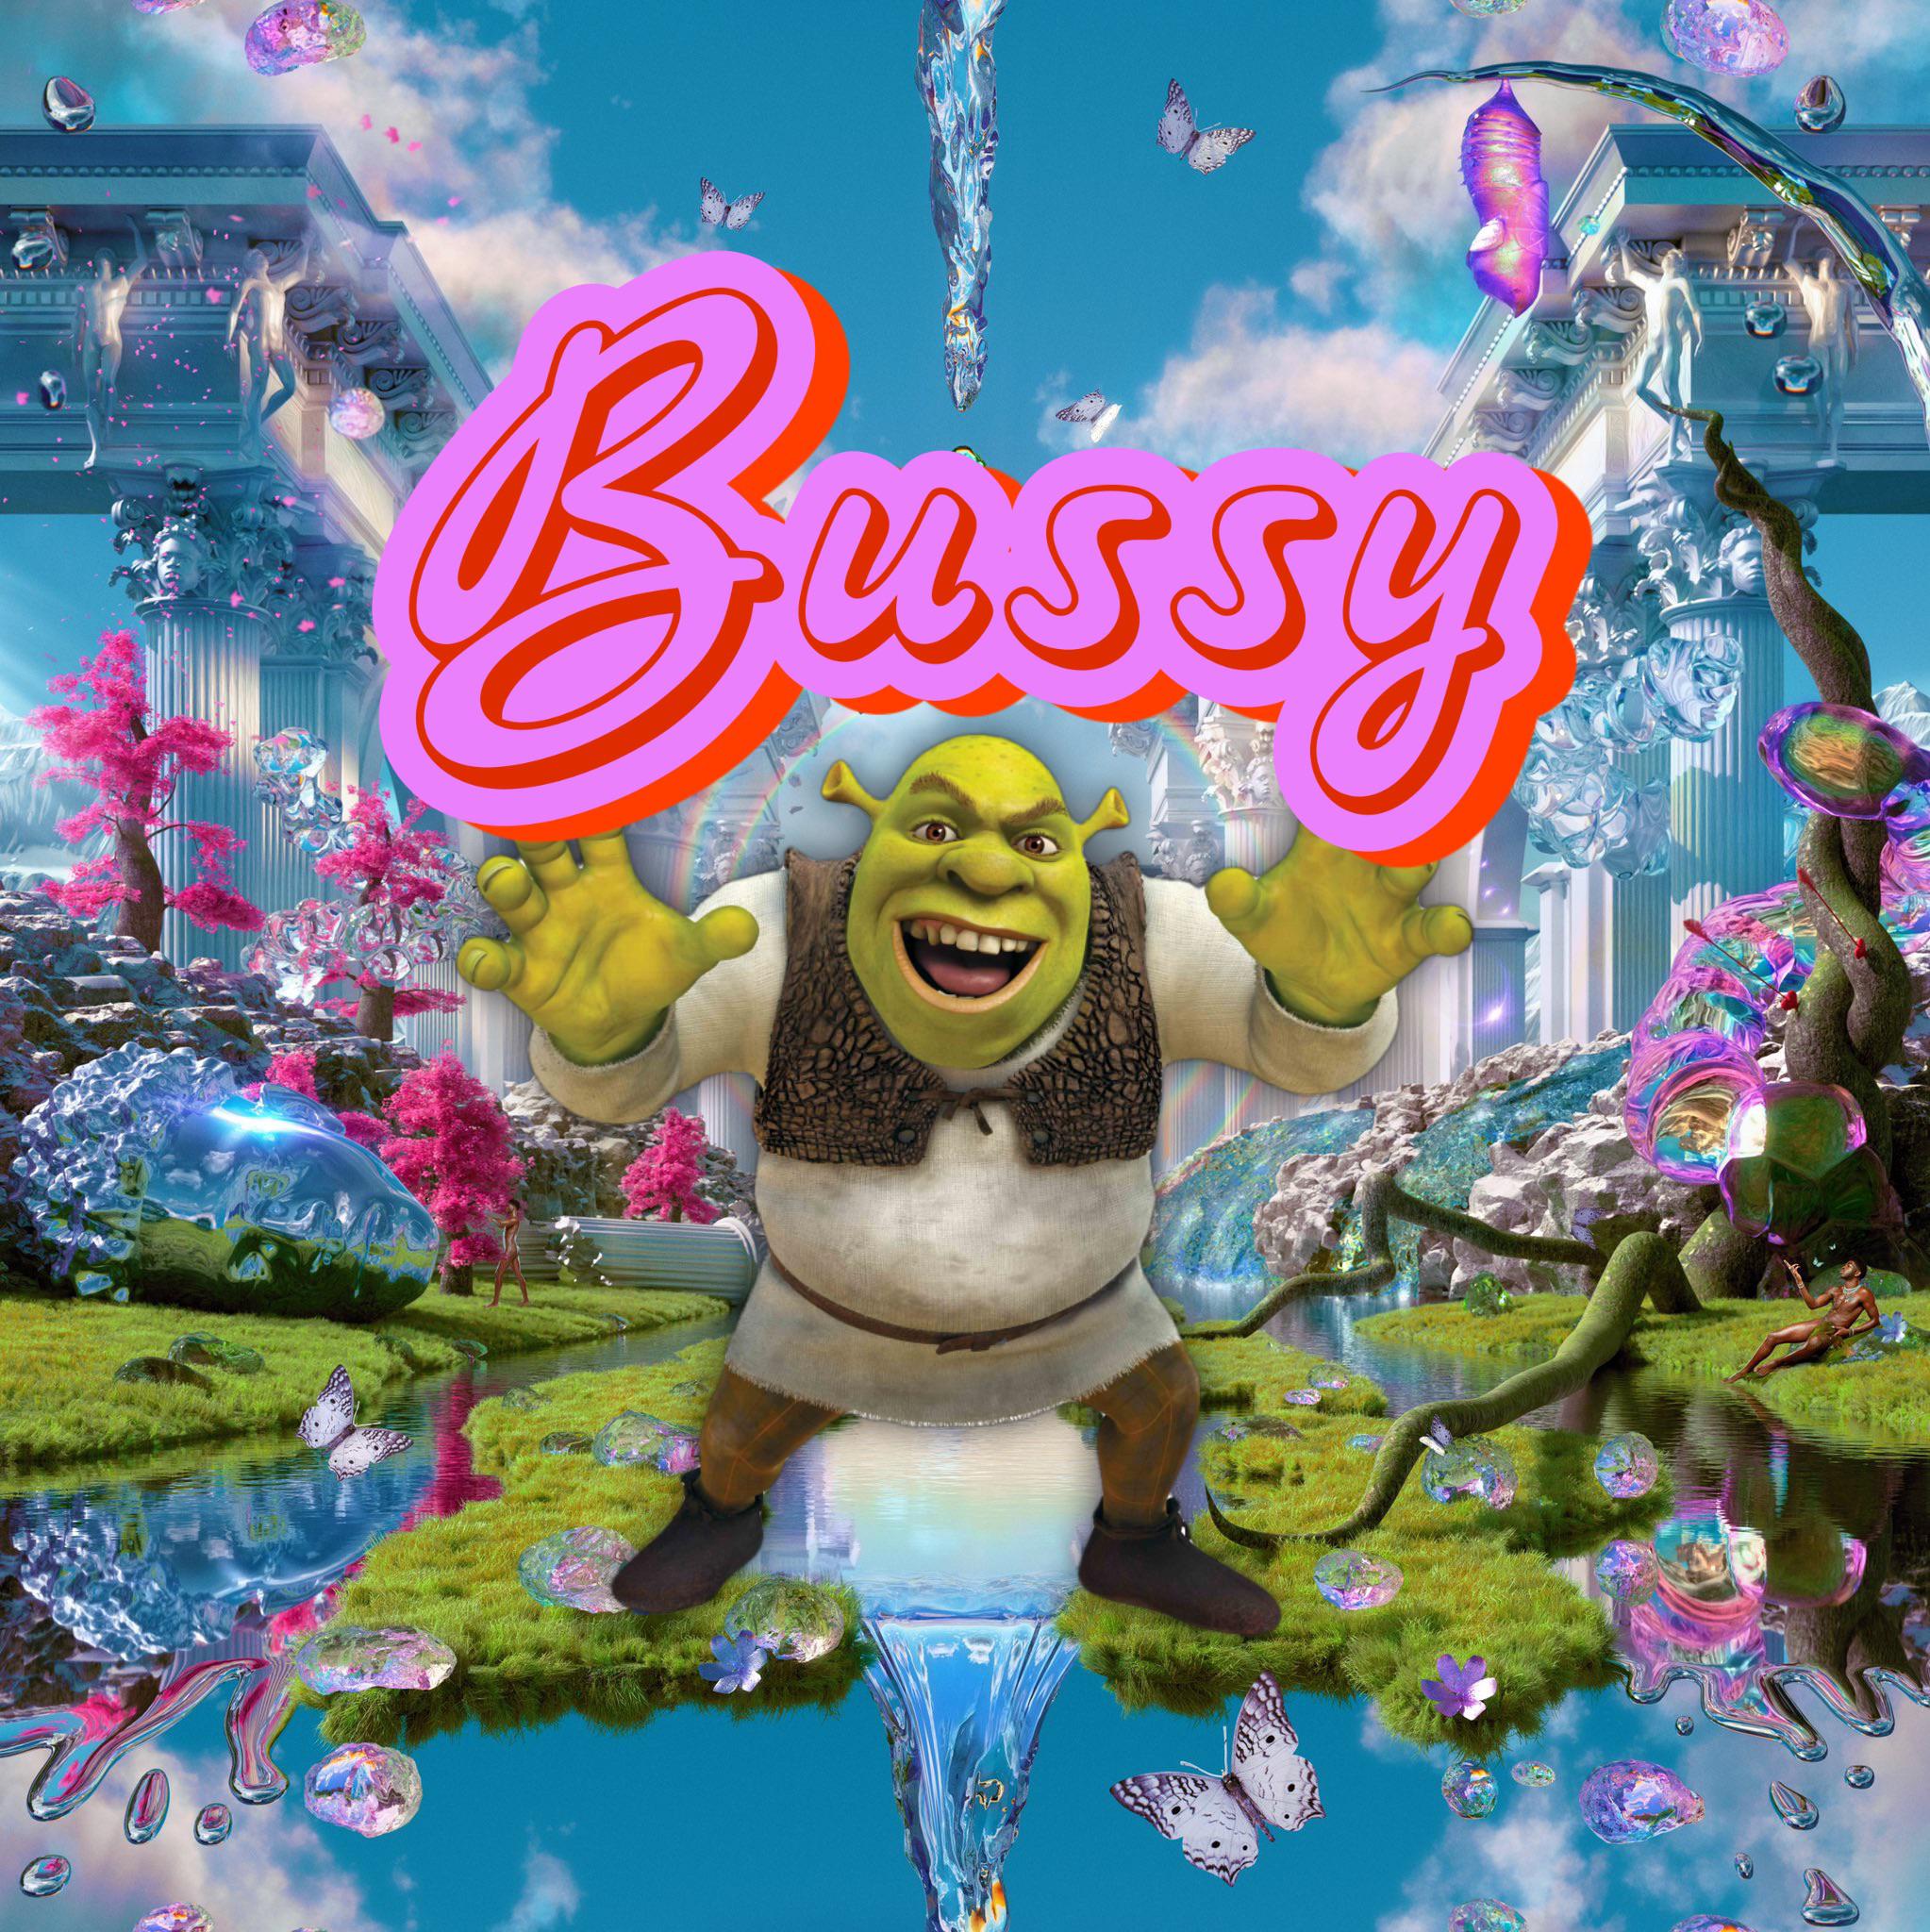 The cover of Bussy's album, which features a cartoon ogre holding up the word 